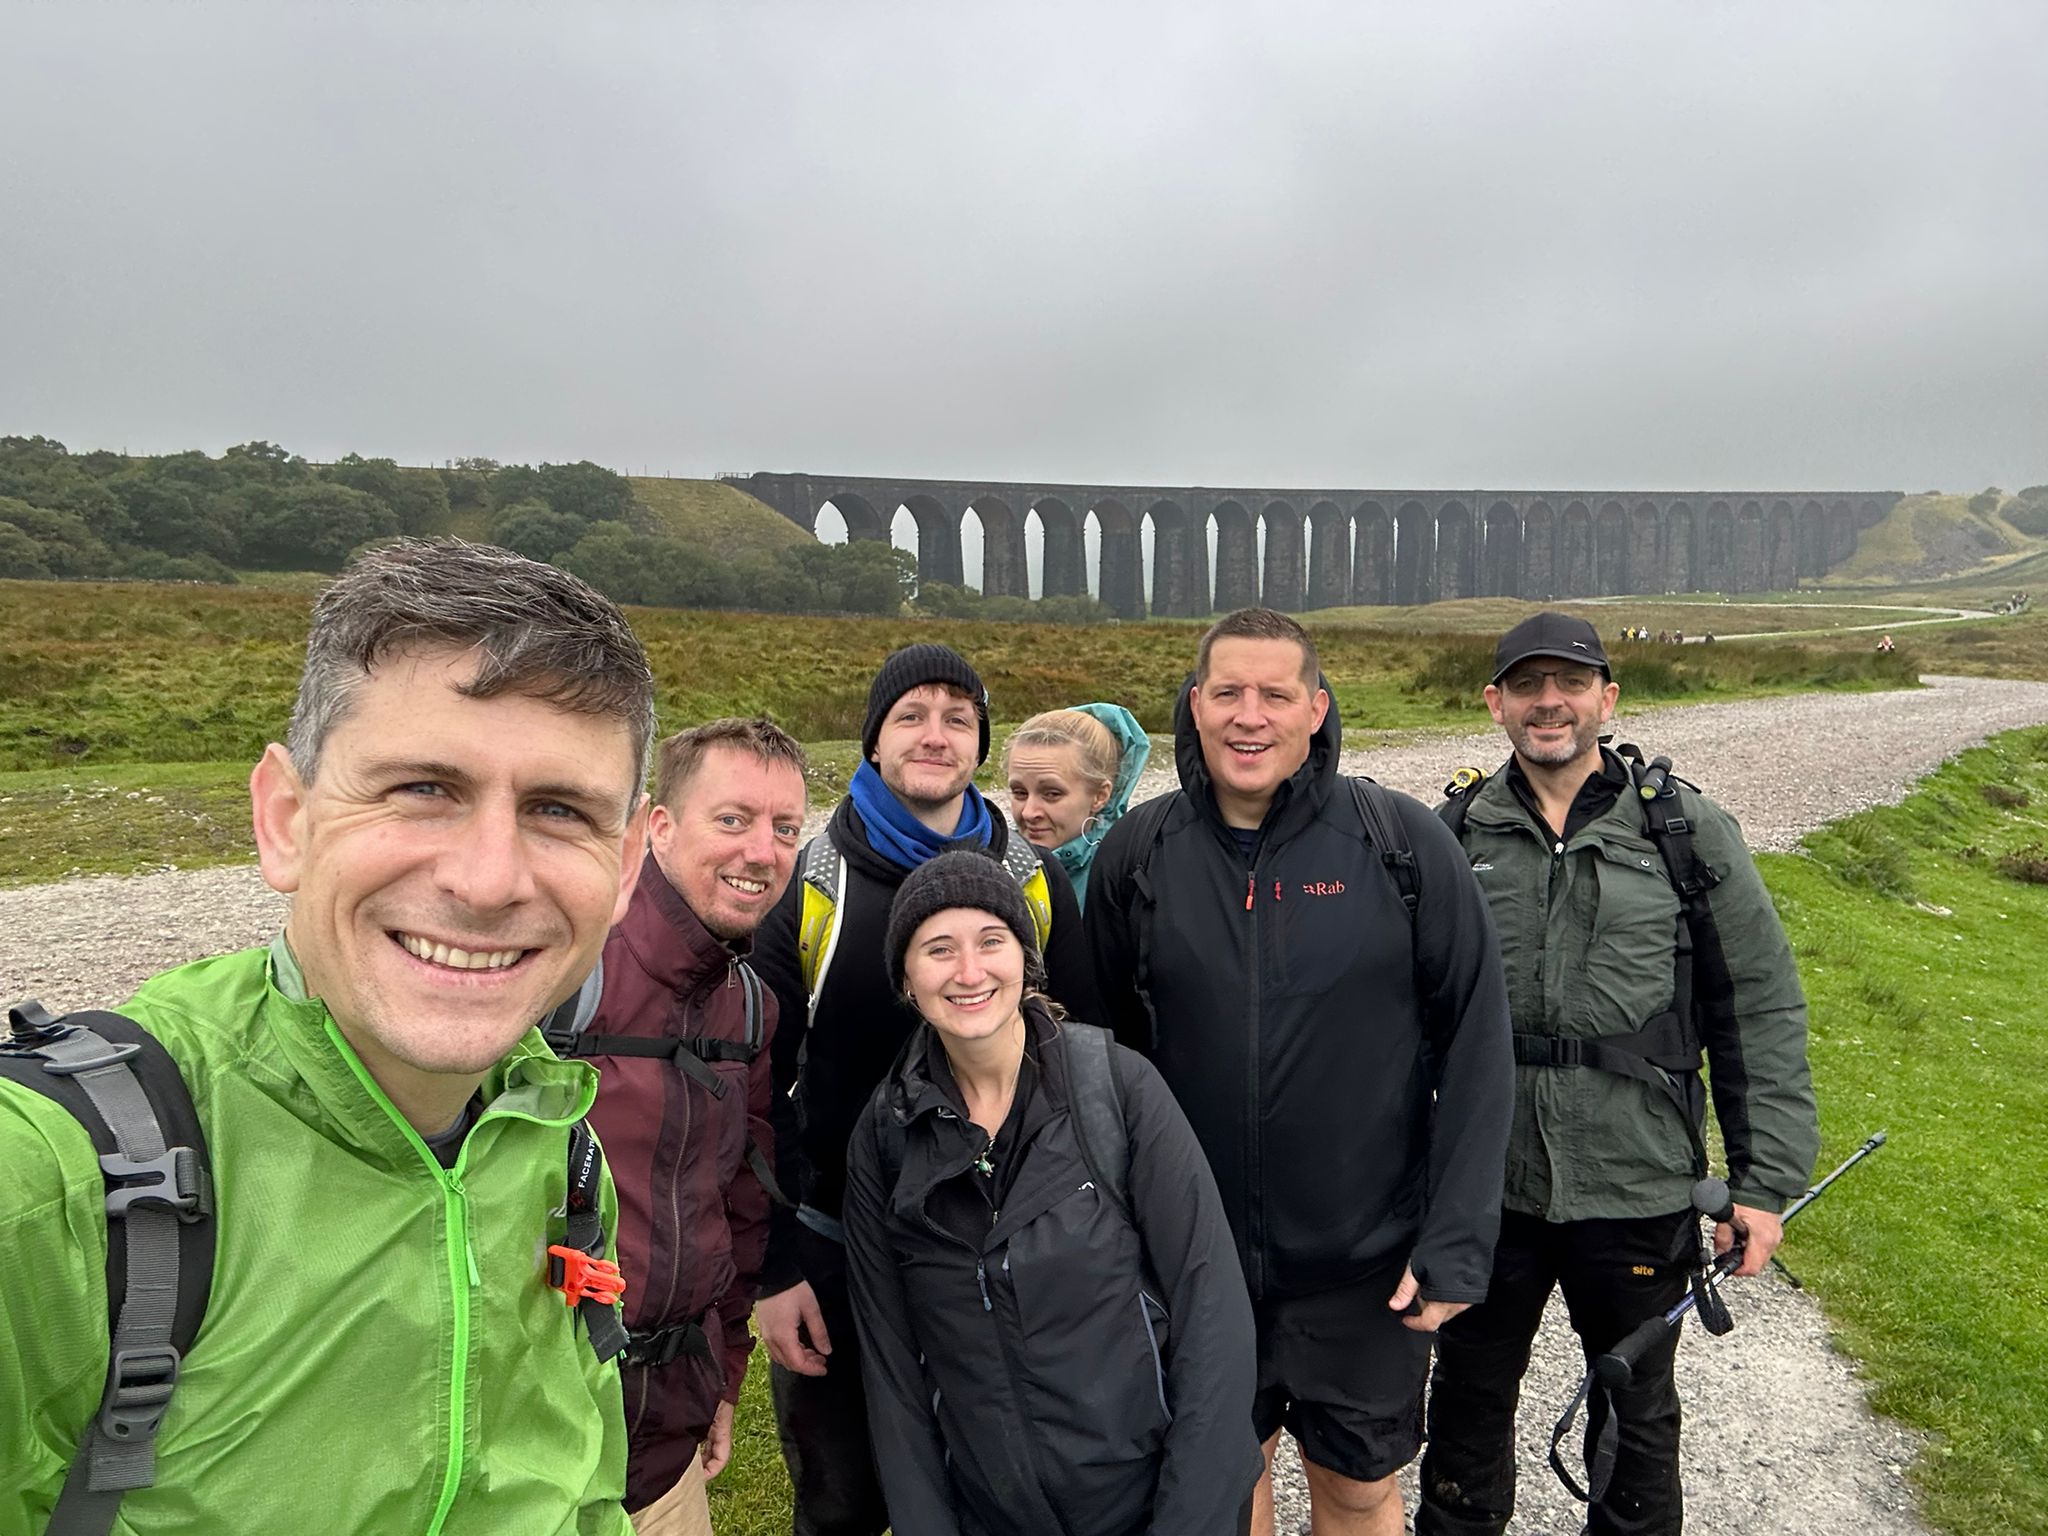 Group picture at one of the Yorkshire 3 Peaks